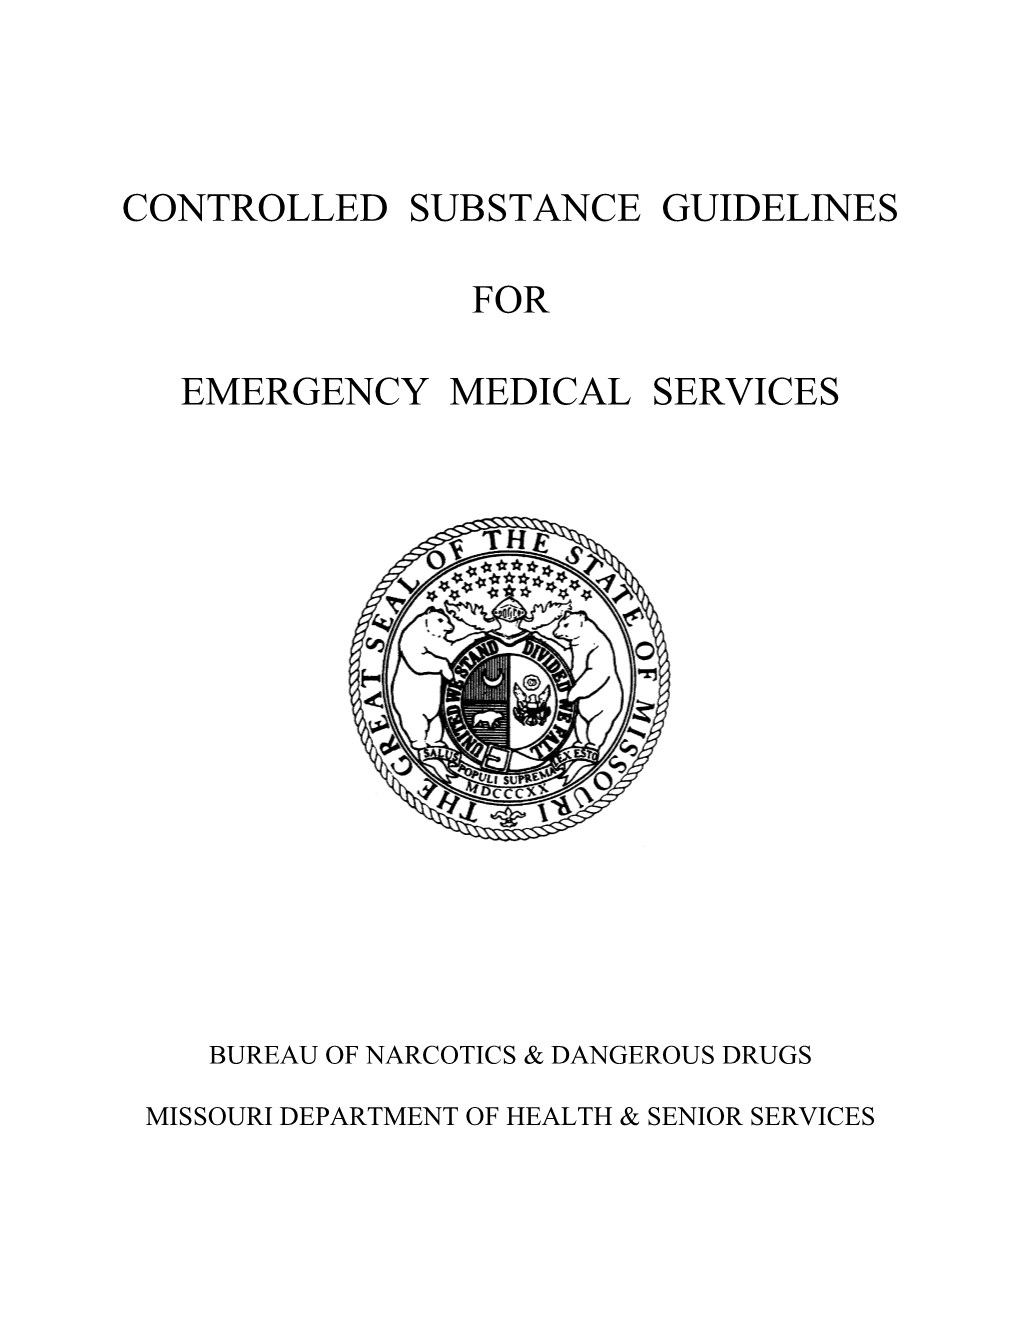 Controlled Substance Guidelines